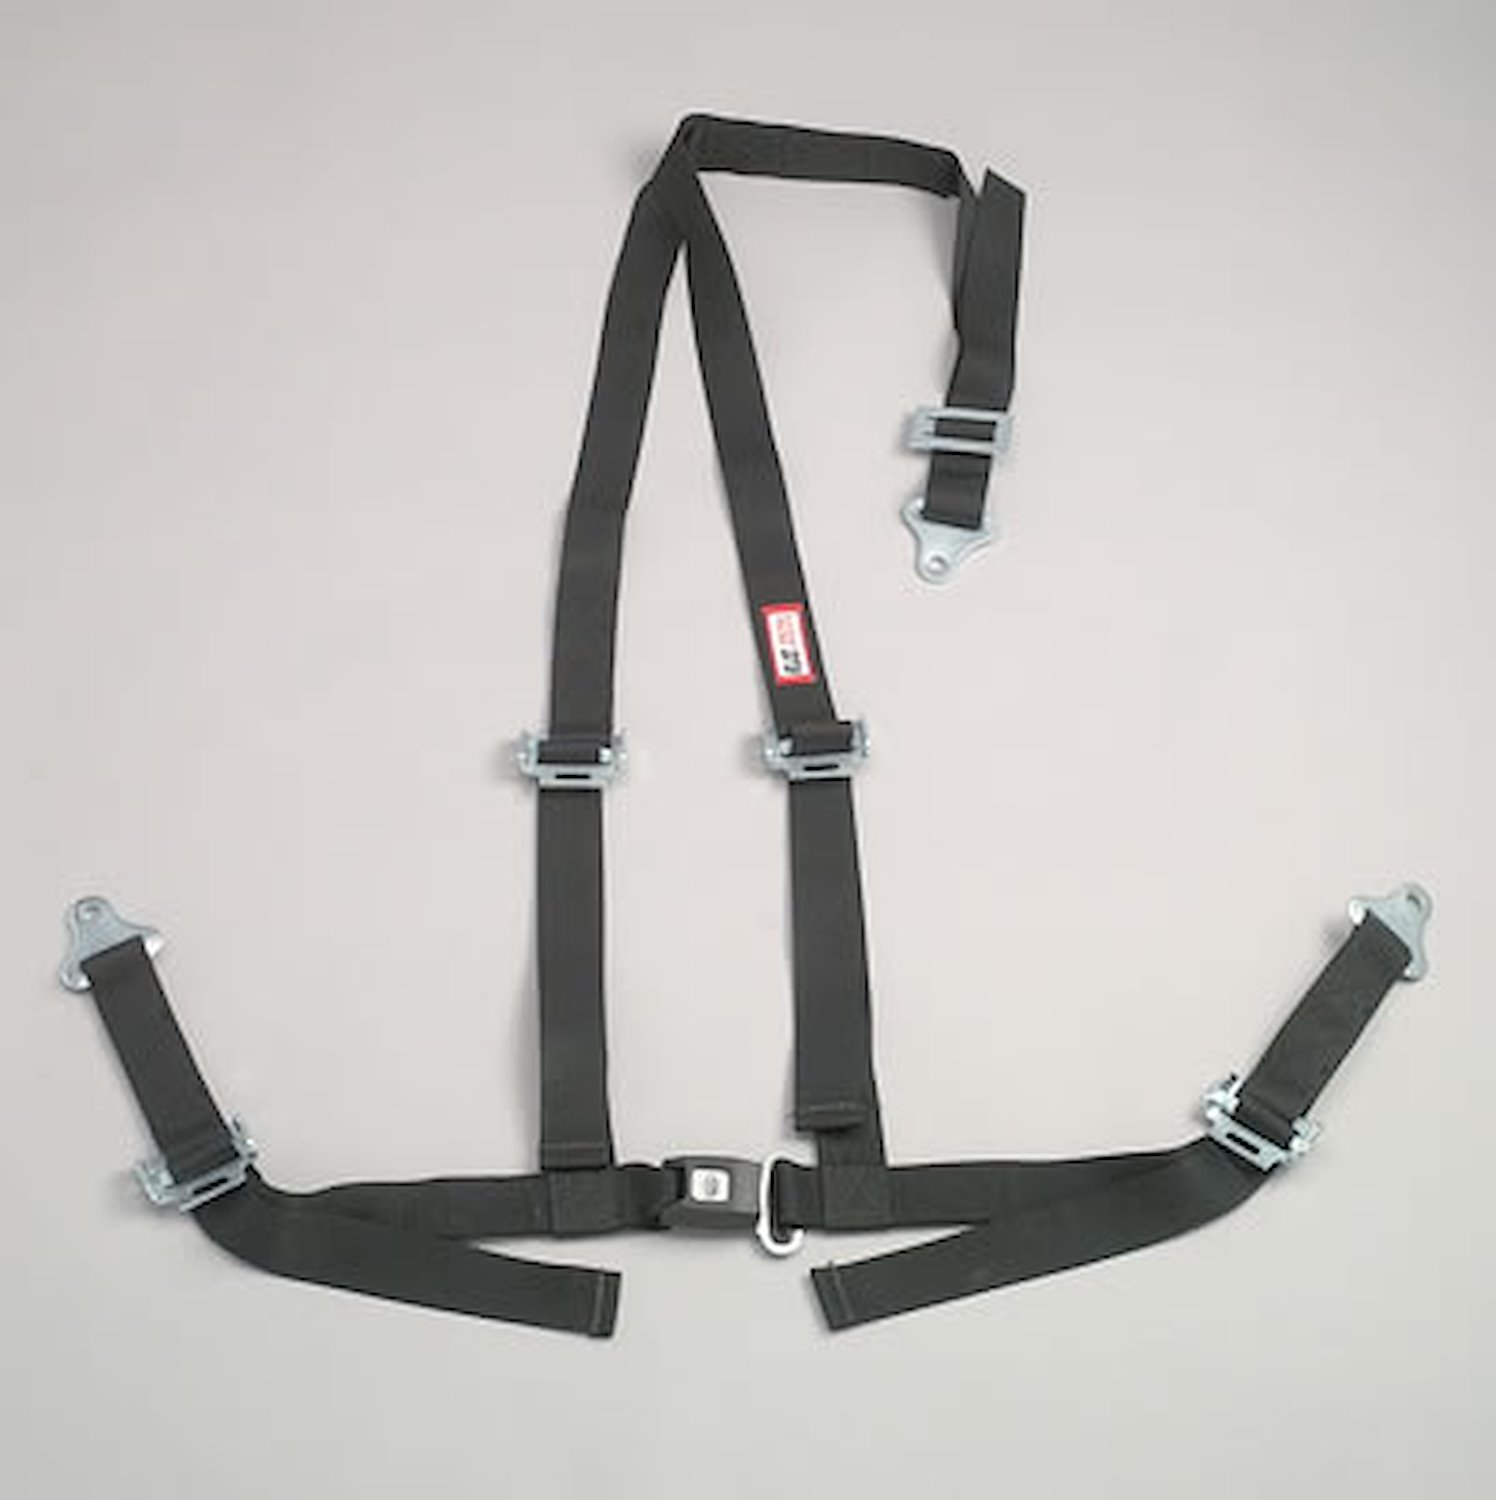 NON-SFI B&T HARNESS 2 PULL DOWN Lap Belt SNAP 2 S. H. Individual ROLL BAR Mount WRAP/BOLT RED